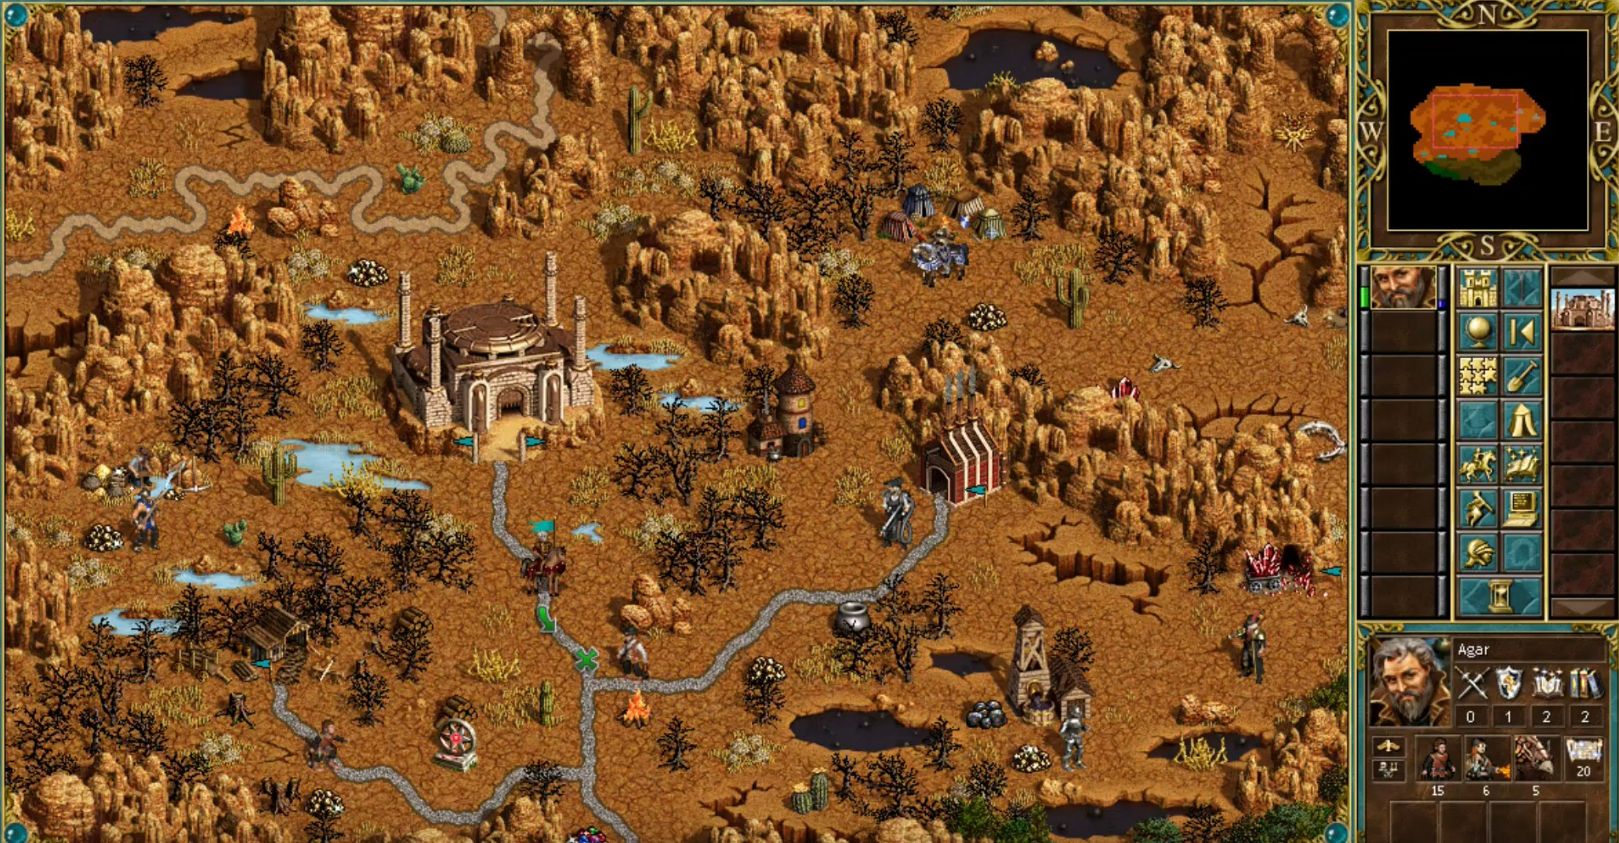 Heroes of Might and Magic III: Horn of the Abyss 1.7.0